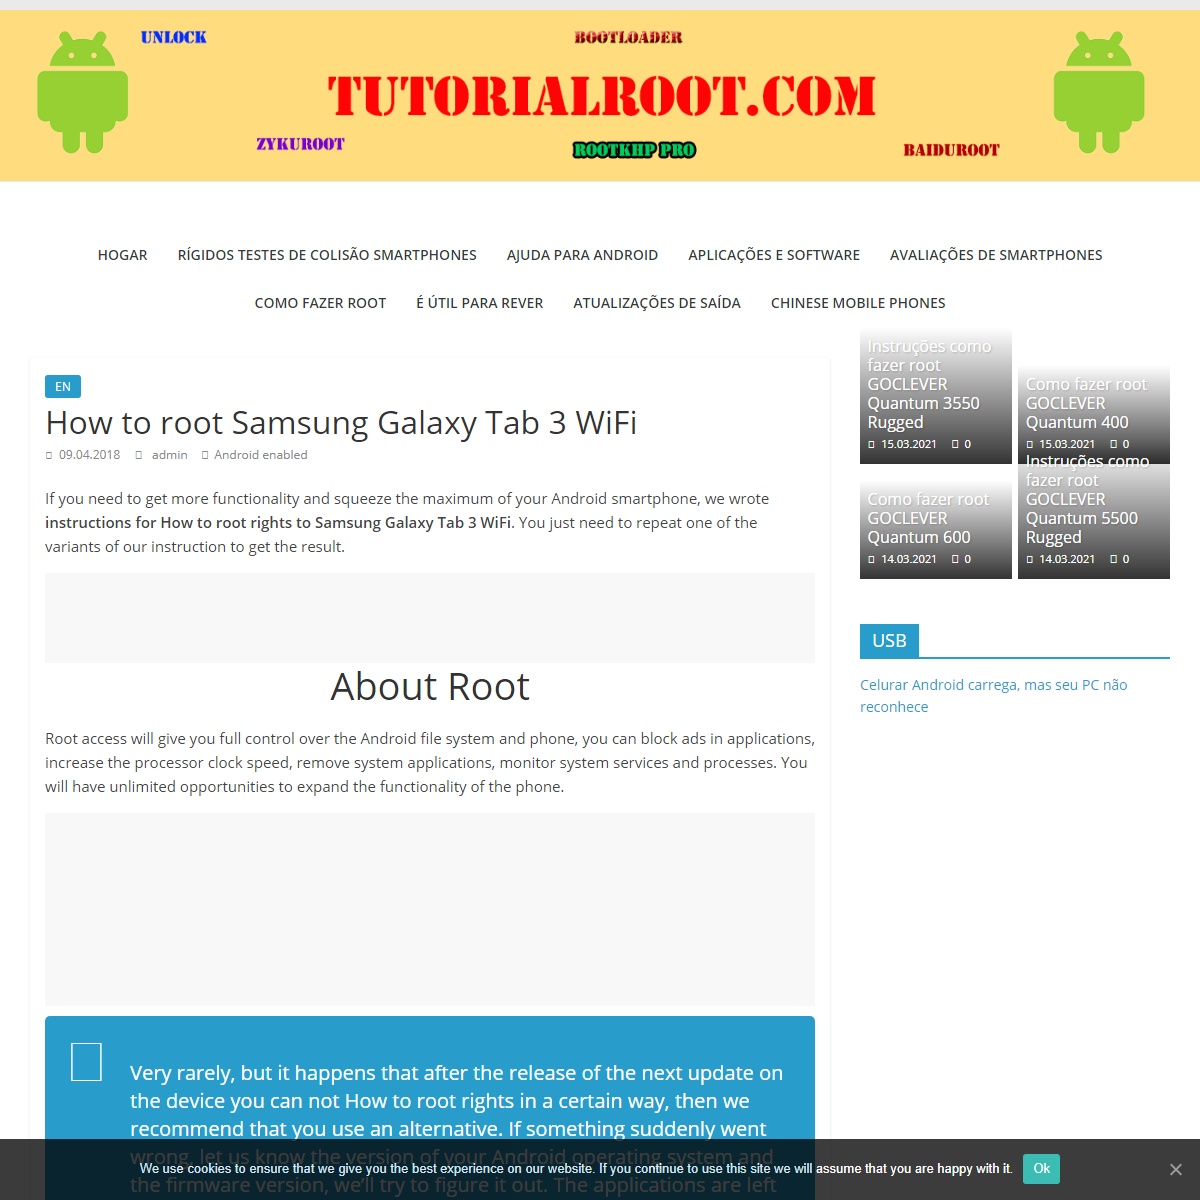 A complete backup of https://tutorialroot.com/how-to-root-samsung-galaxy-tab-3-wifi/